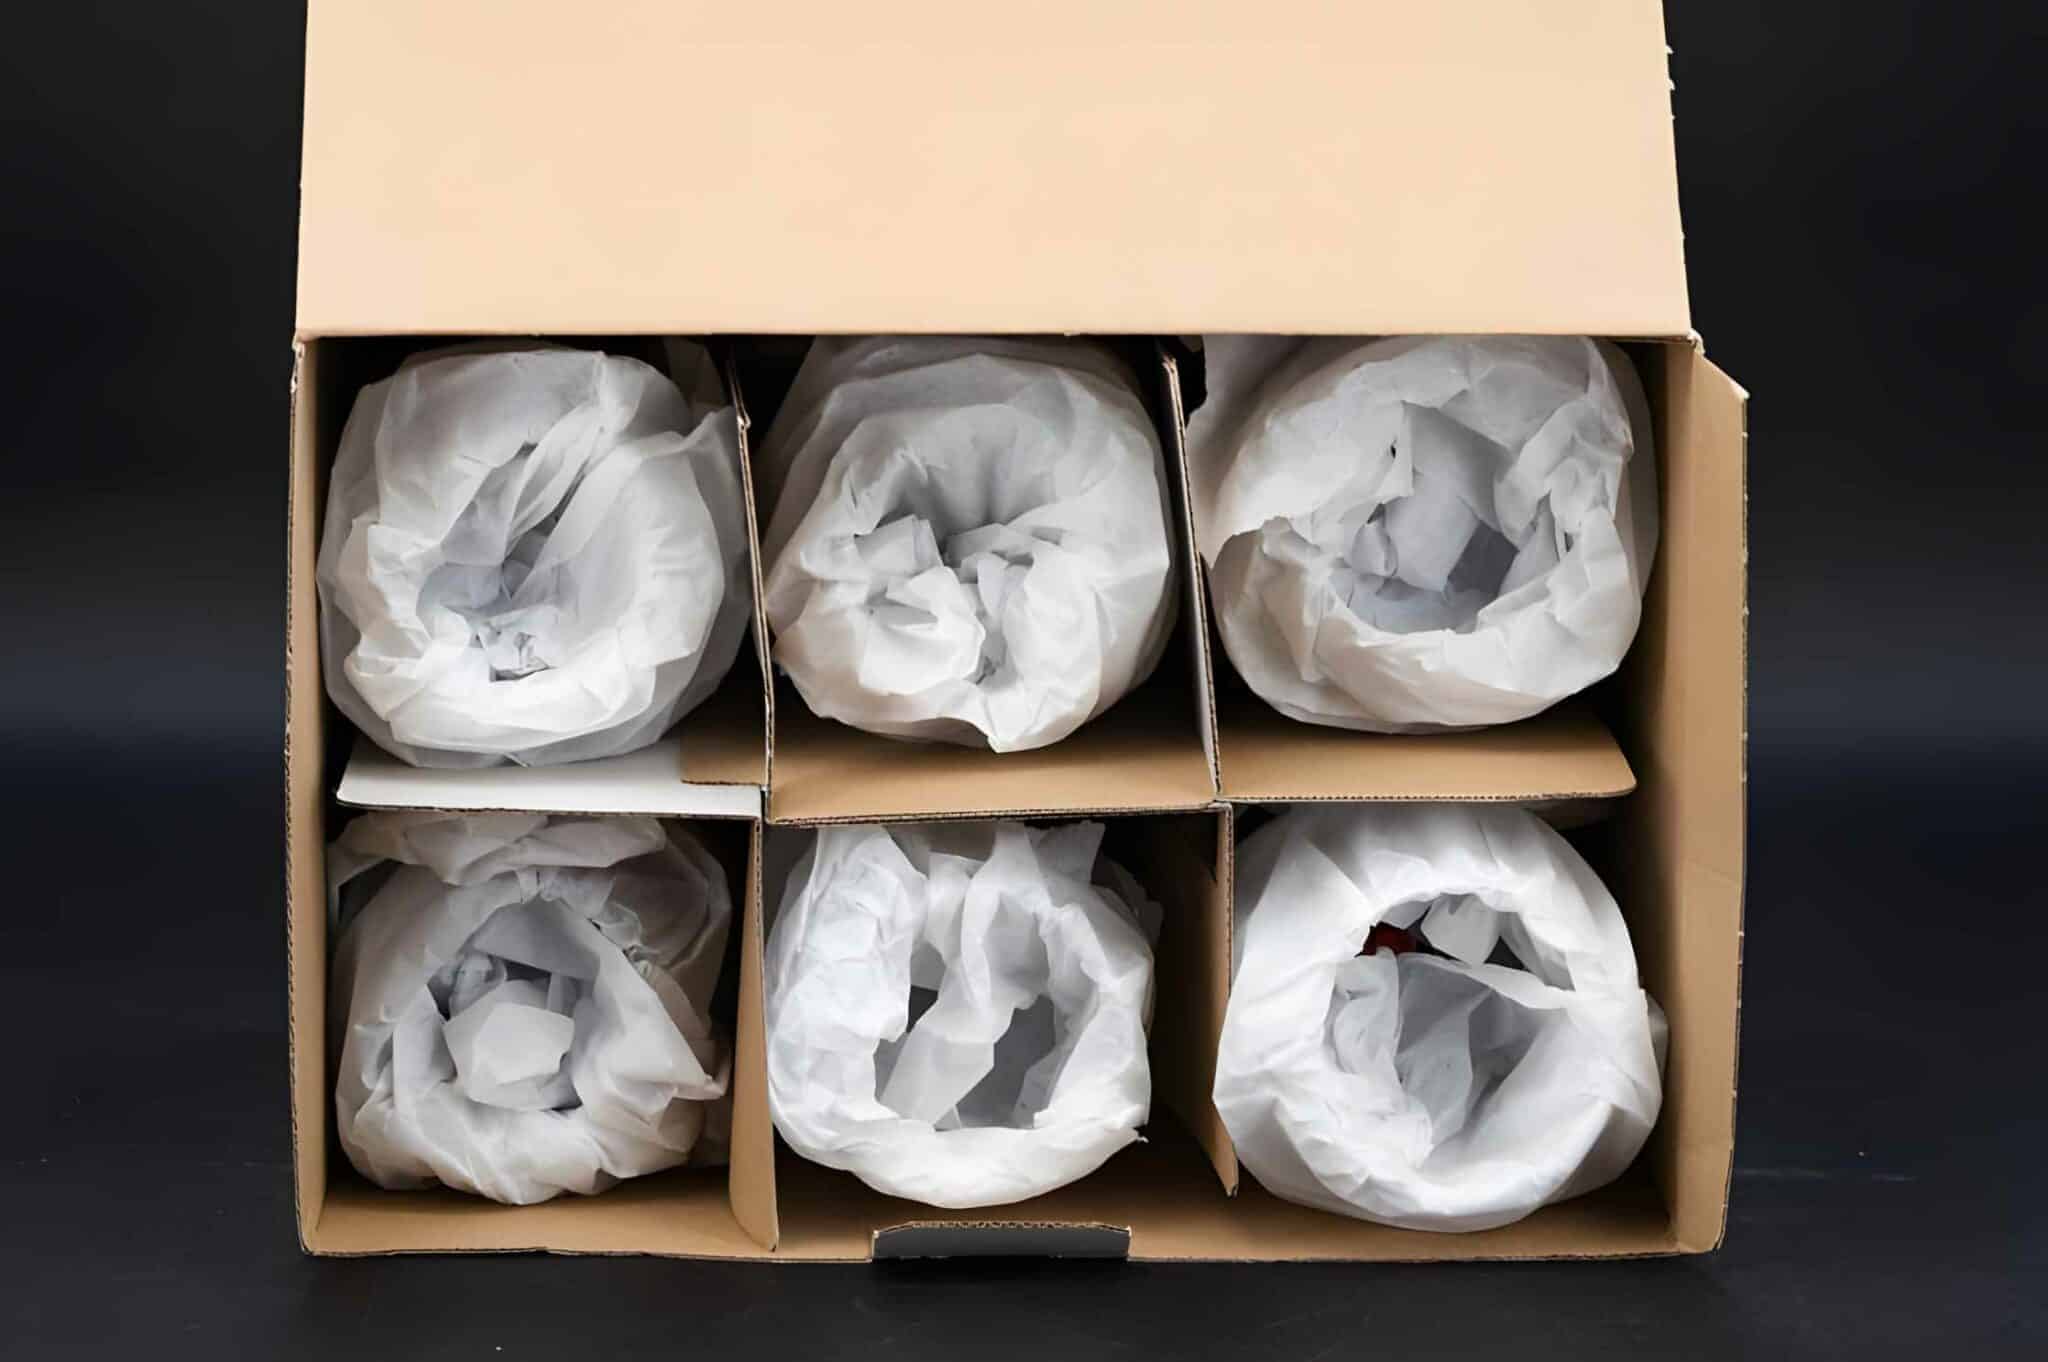 Wrap it, Box it, Tape it: A Complete Guide to Types of Packing Materials